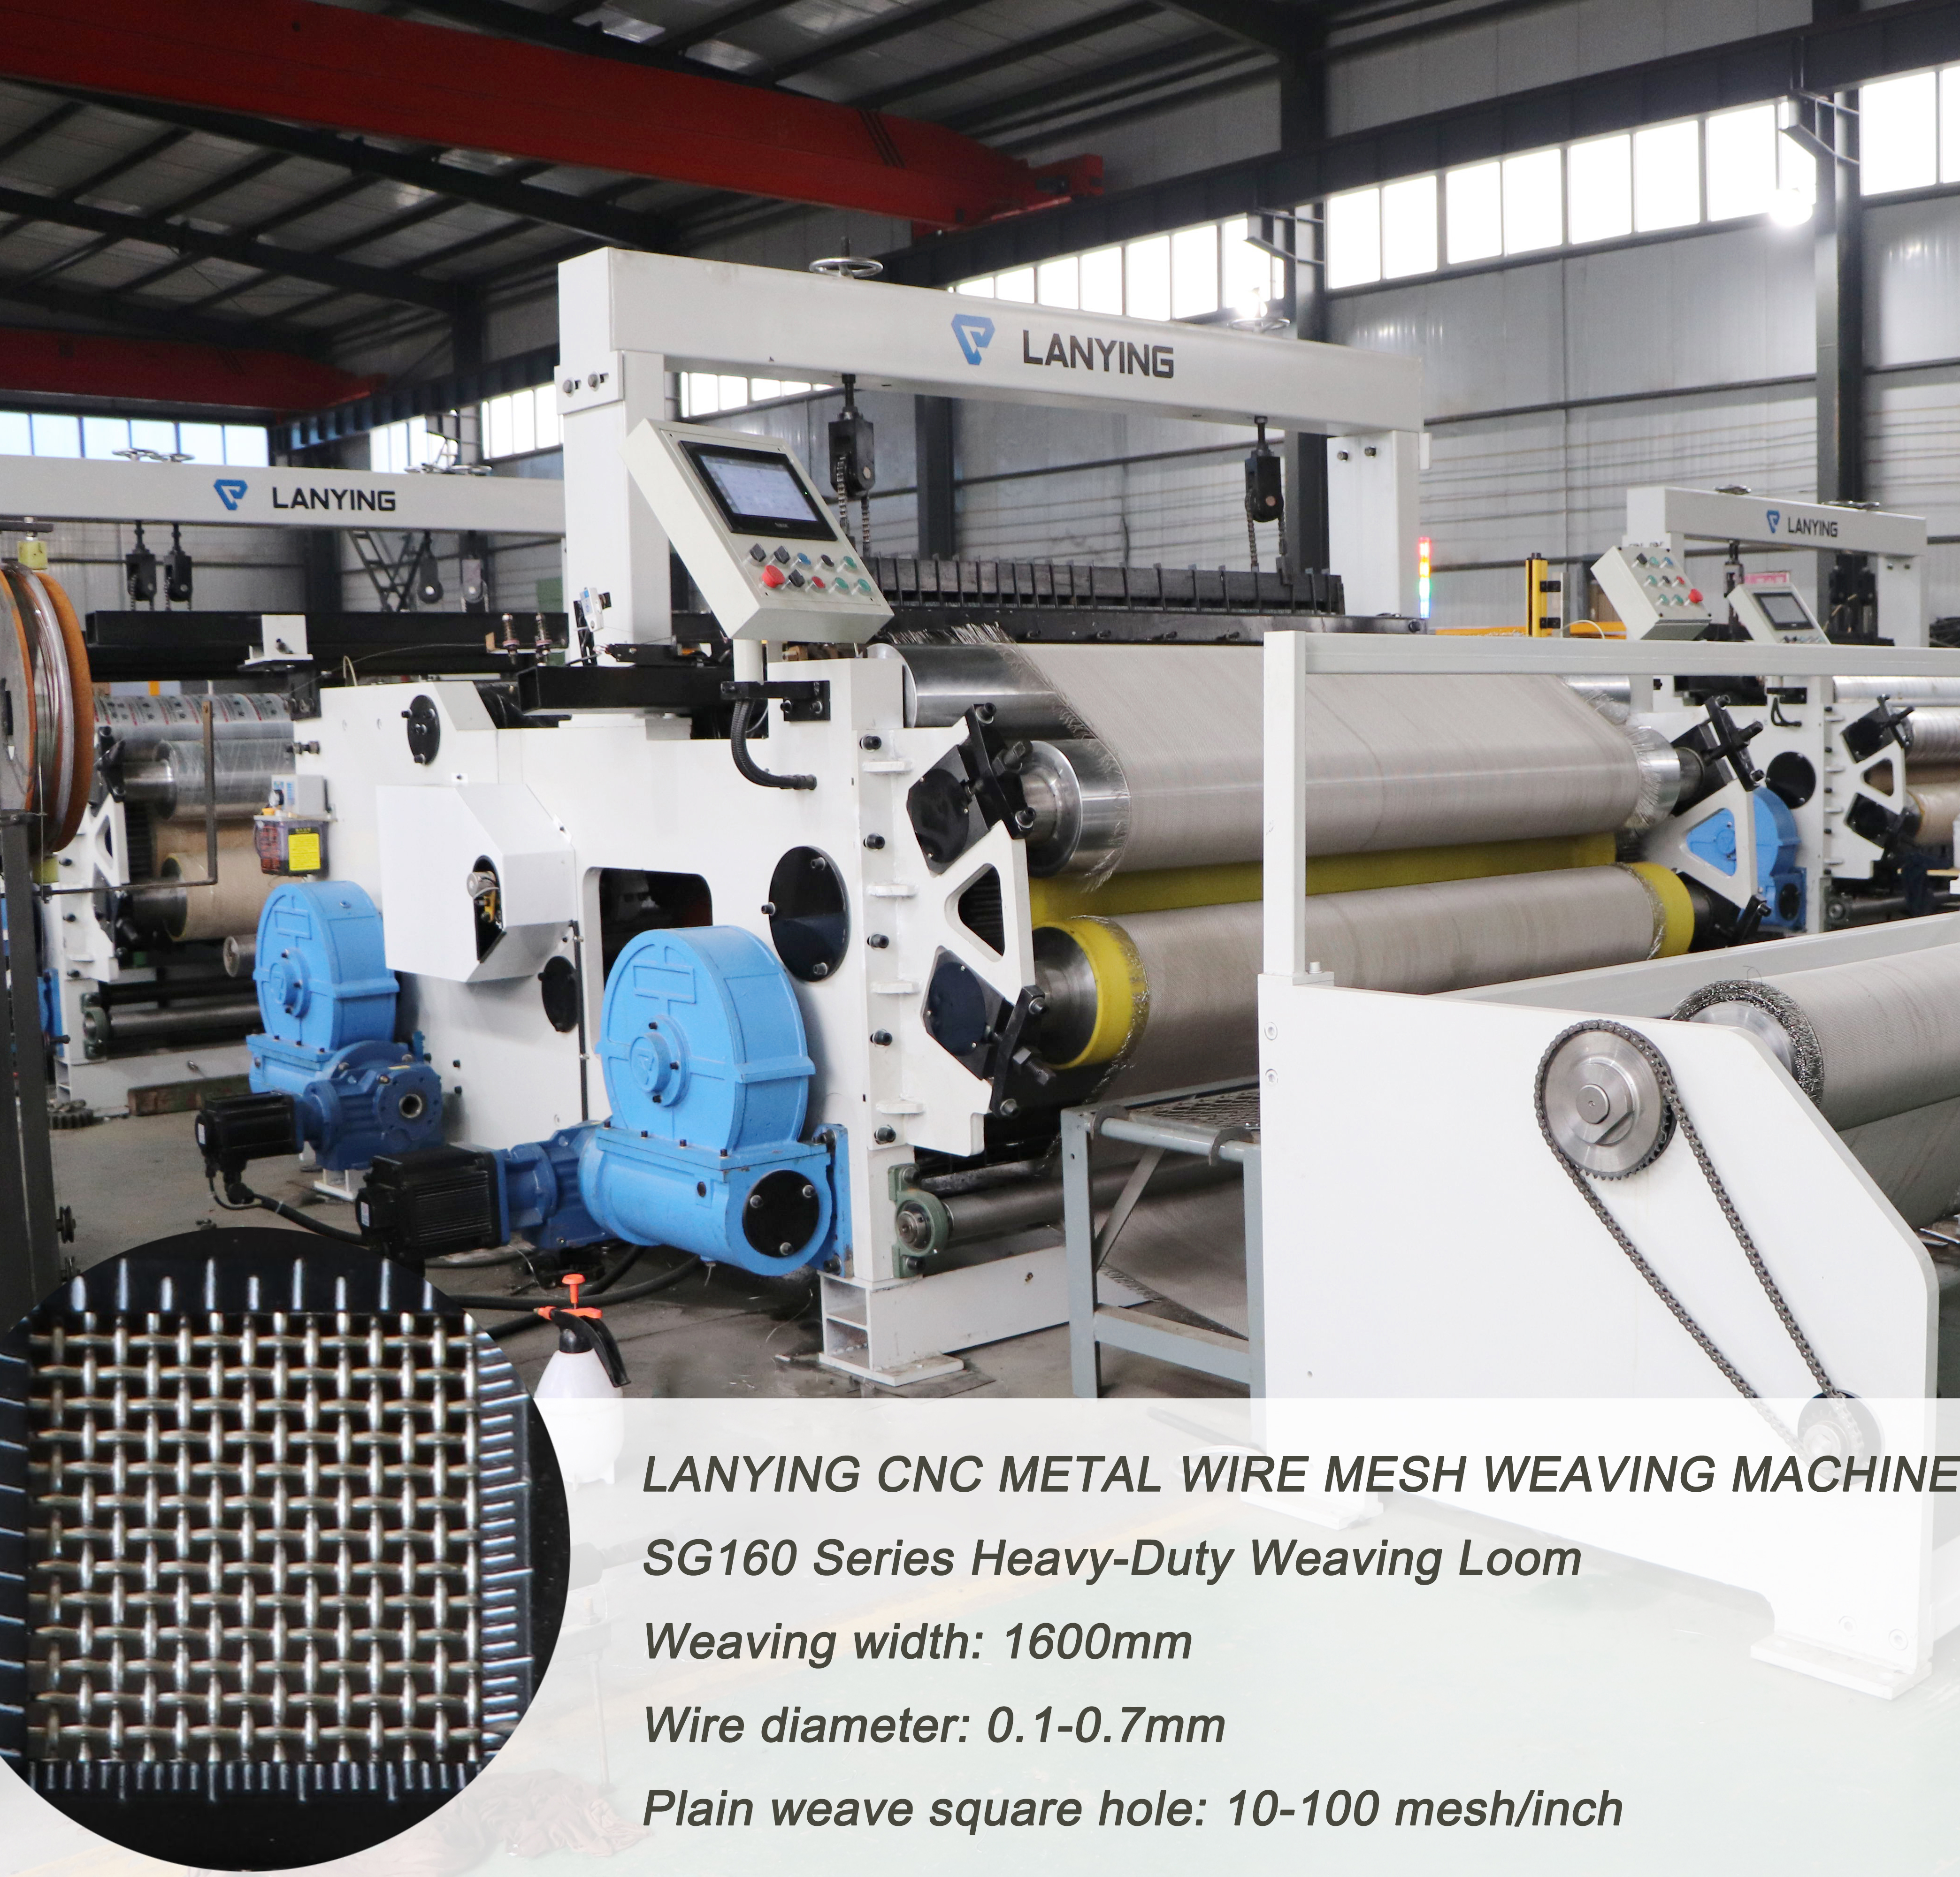 What is 3-roller take-up mechanism and cloth wind-up mechanism outside the machine?